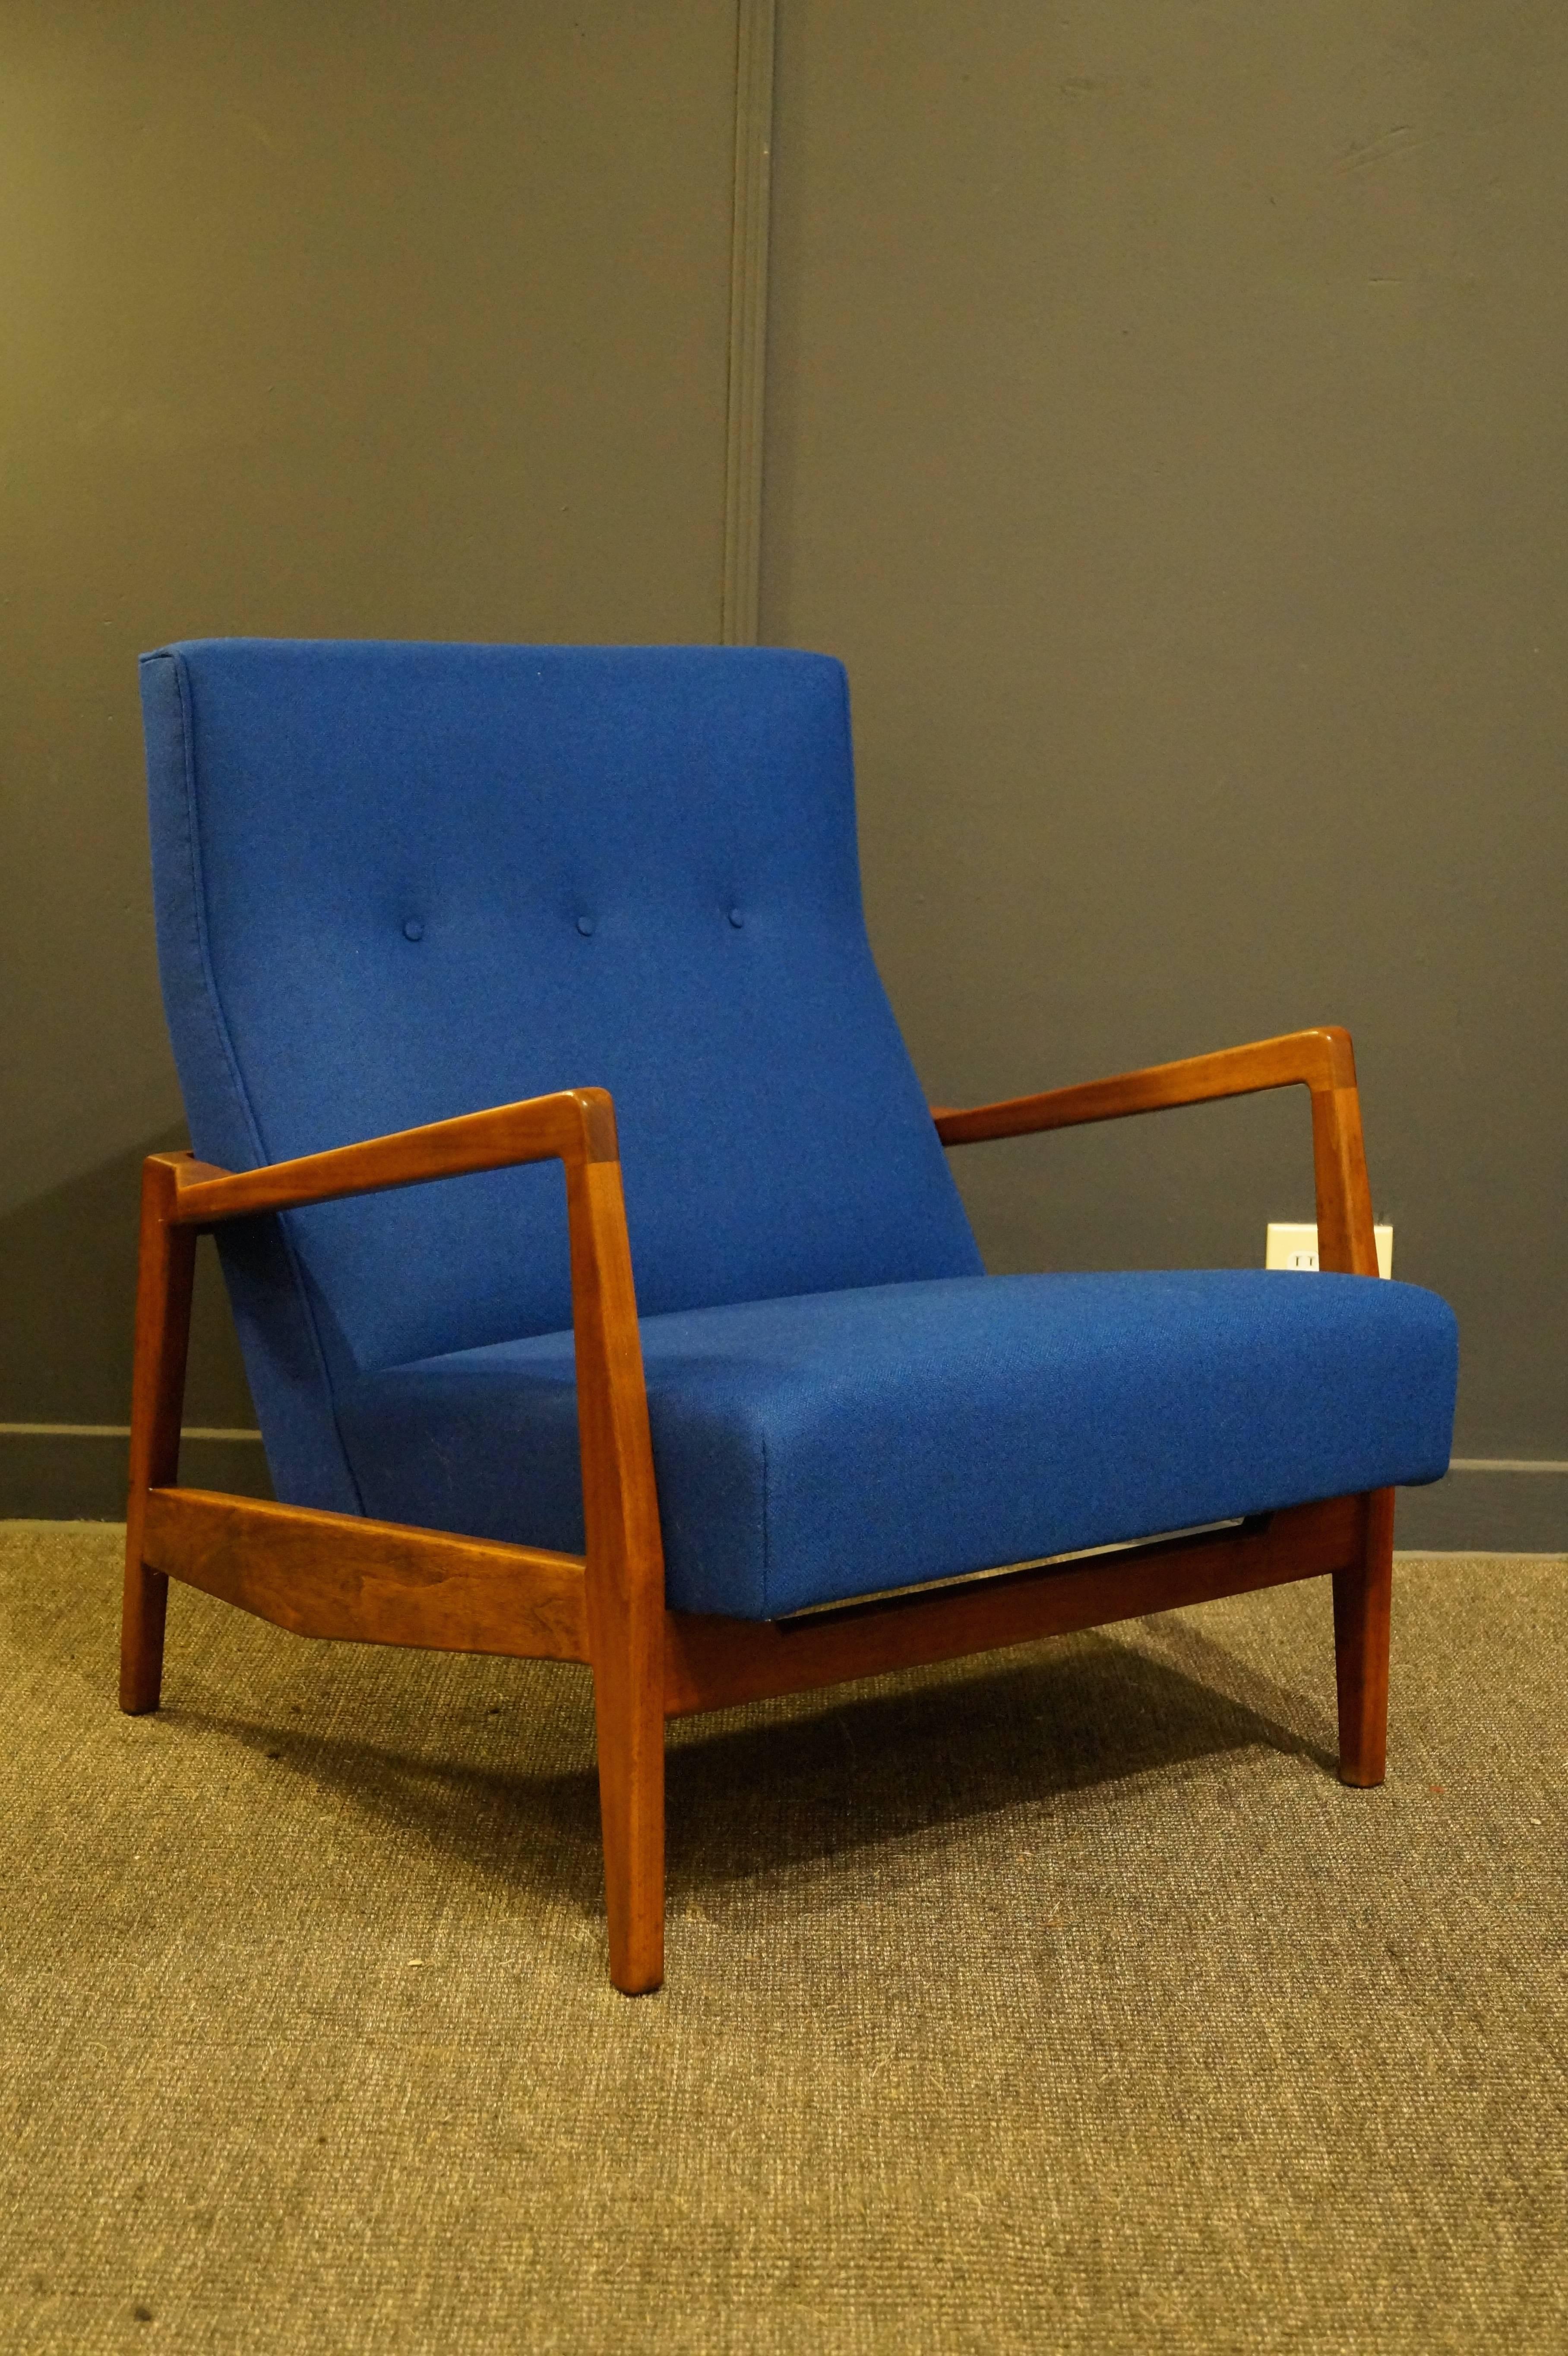 Rare chair by the infamous Jens Risom made from solid walnut with signature angular details. This is great for big or small with generous proportions and comfort for all. 
Newly refinished and upholstered in Kvadrat wool, labeled.